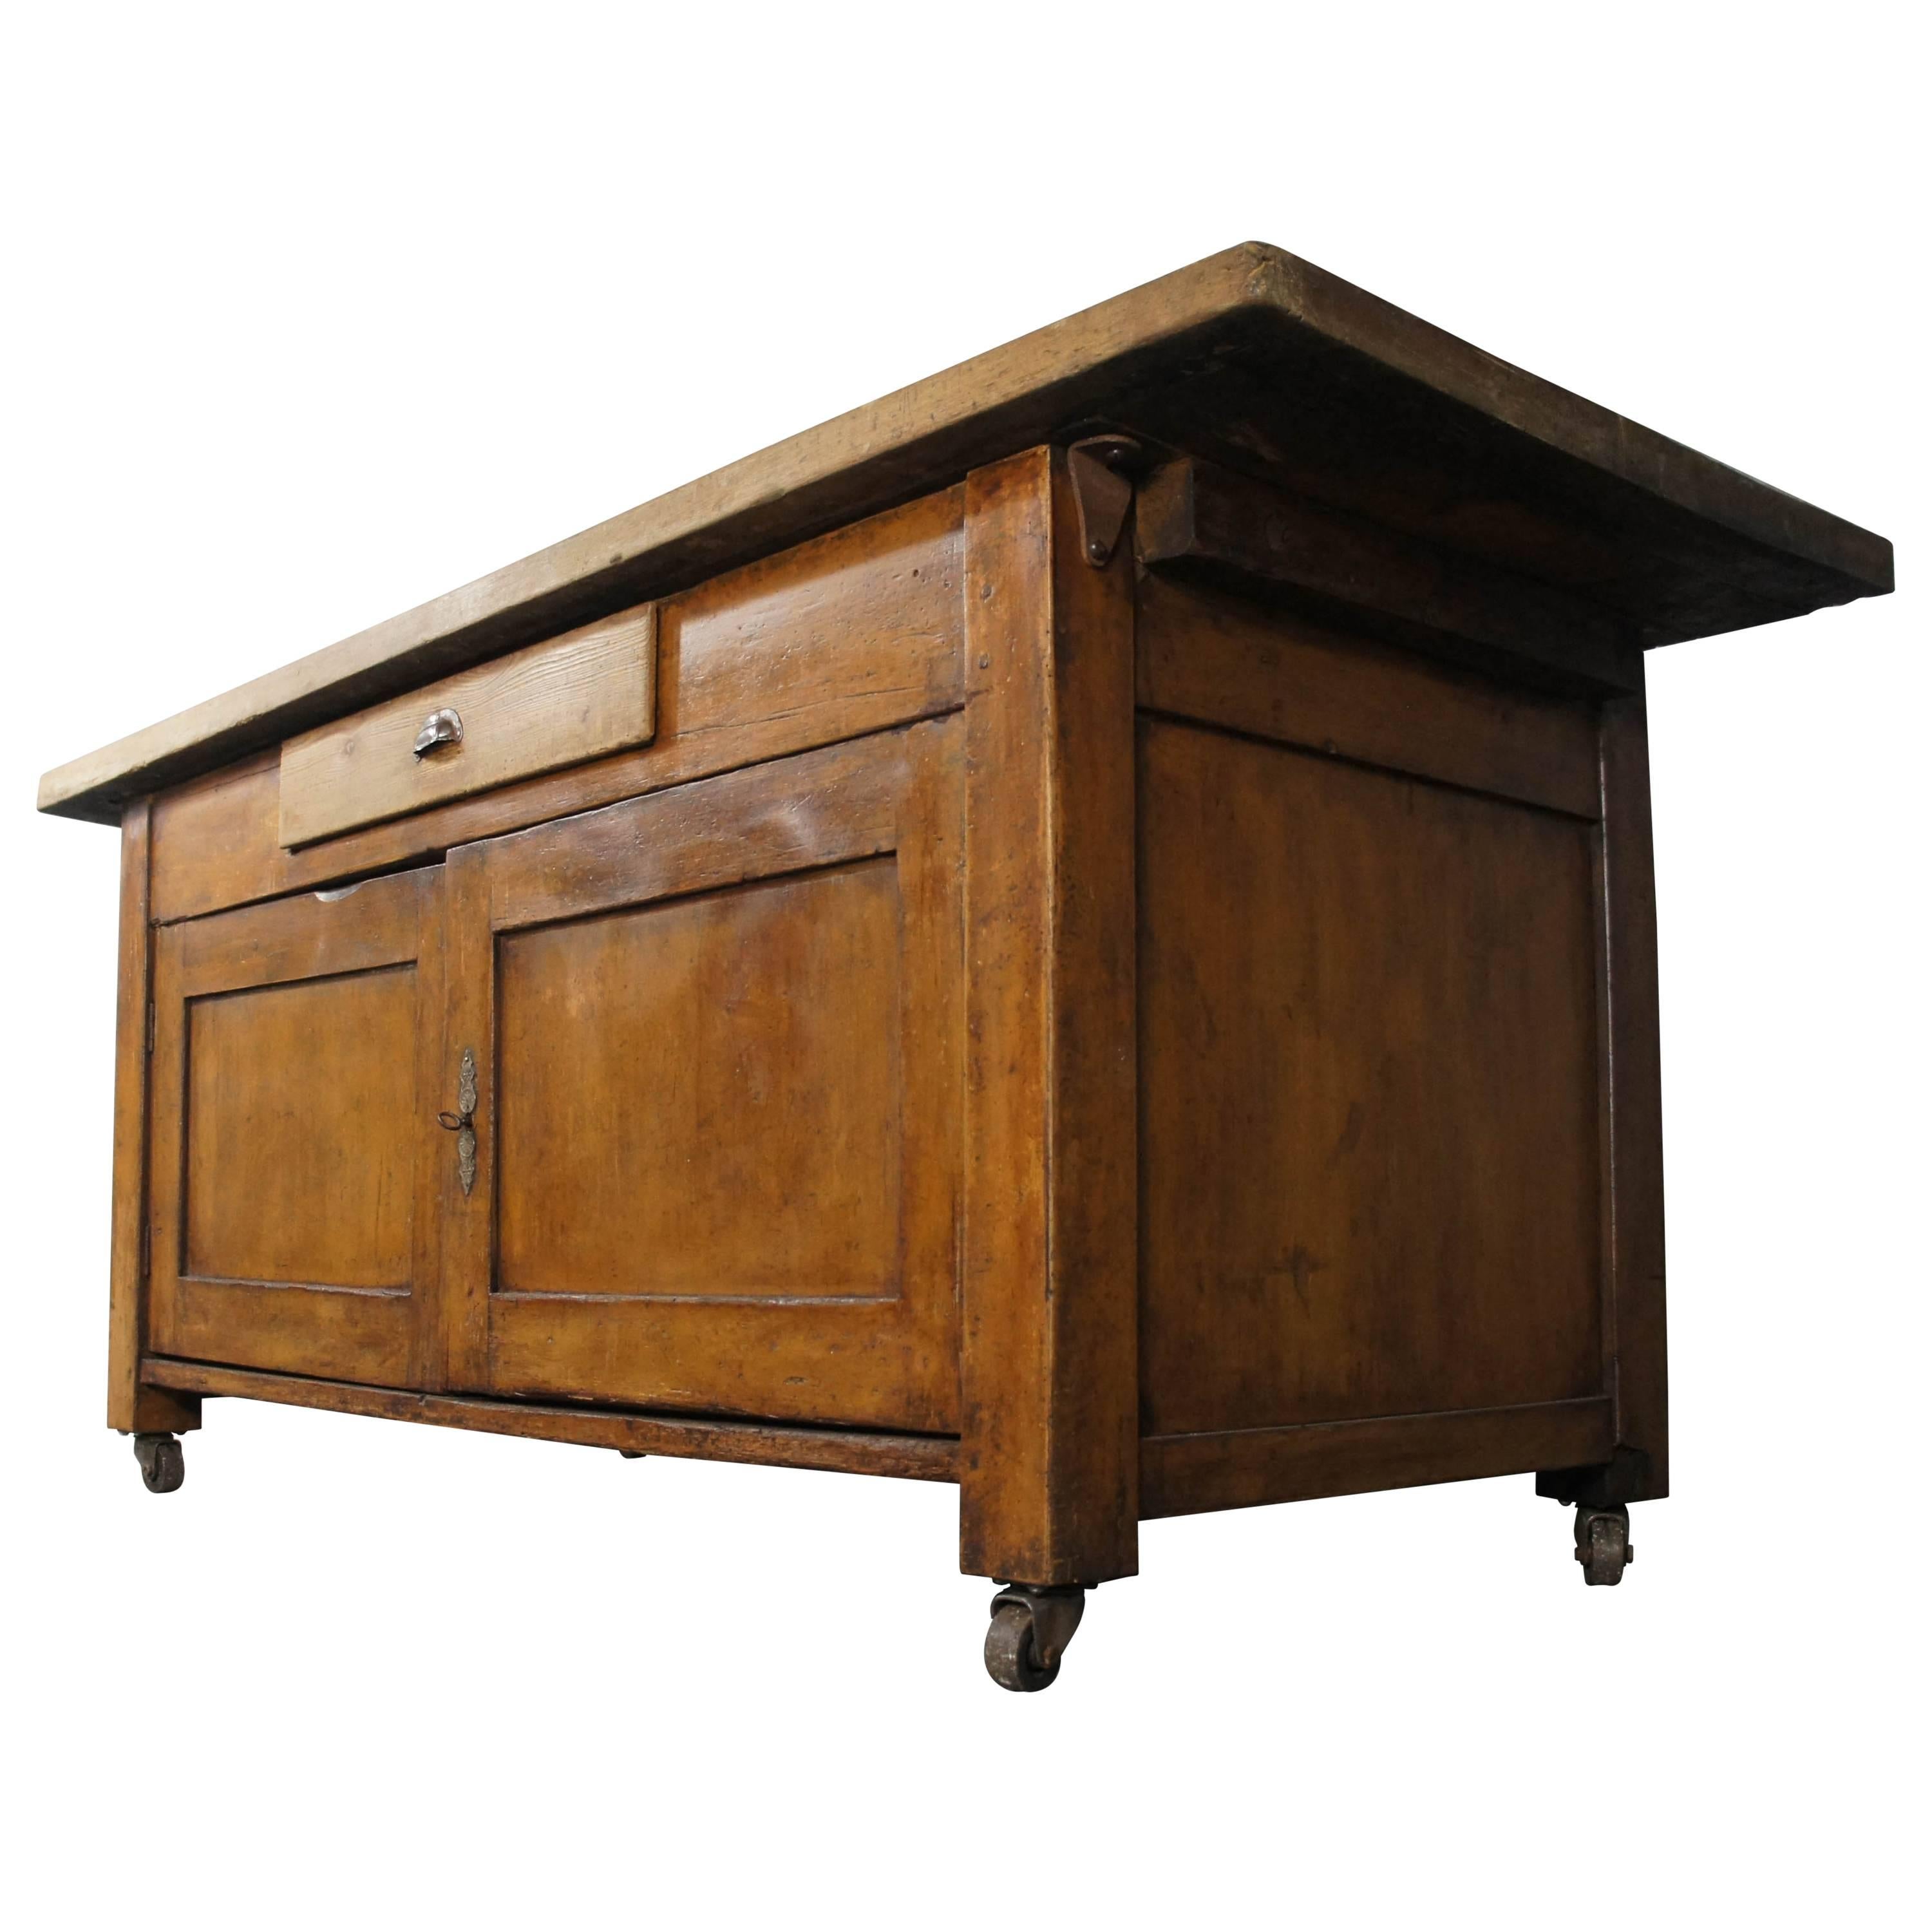 20th Century Pine and Beech Baker's Table Freestanding Kitchen Island